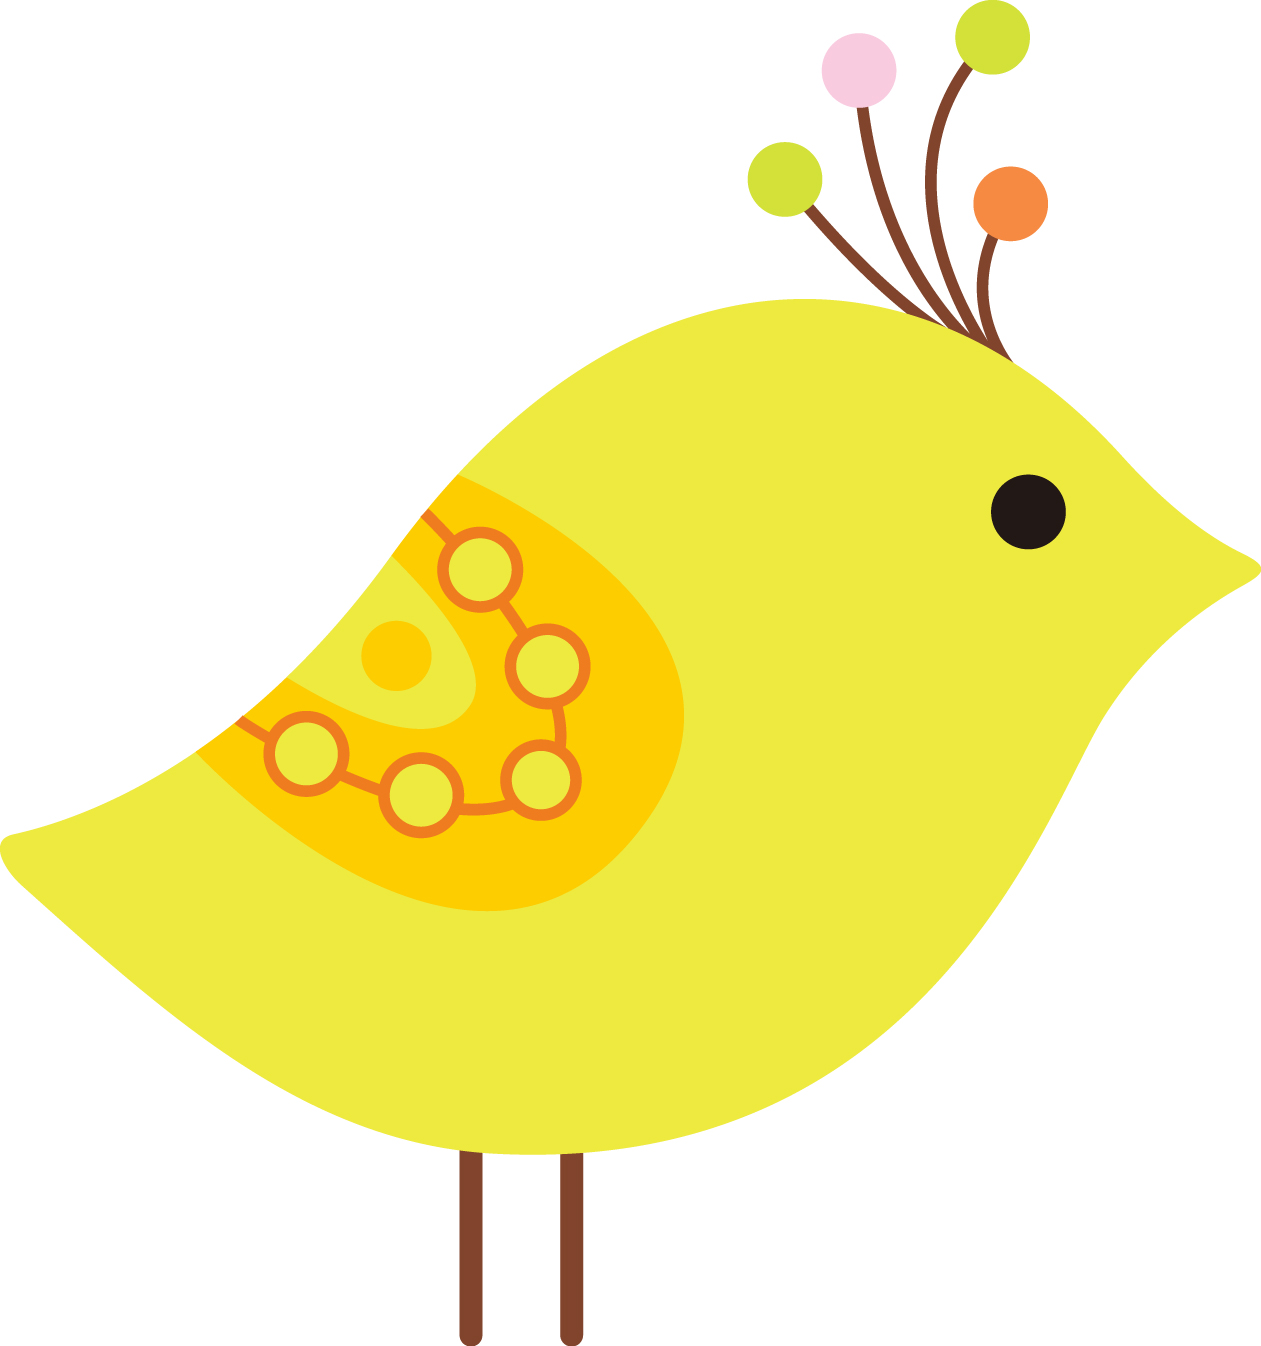 free clipart images birds - photo #16